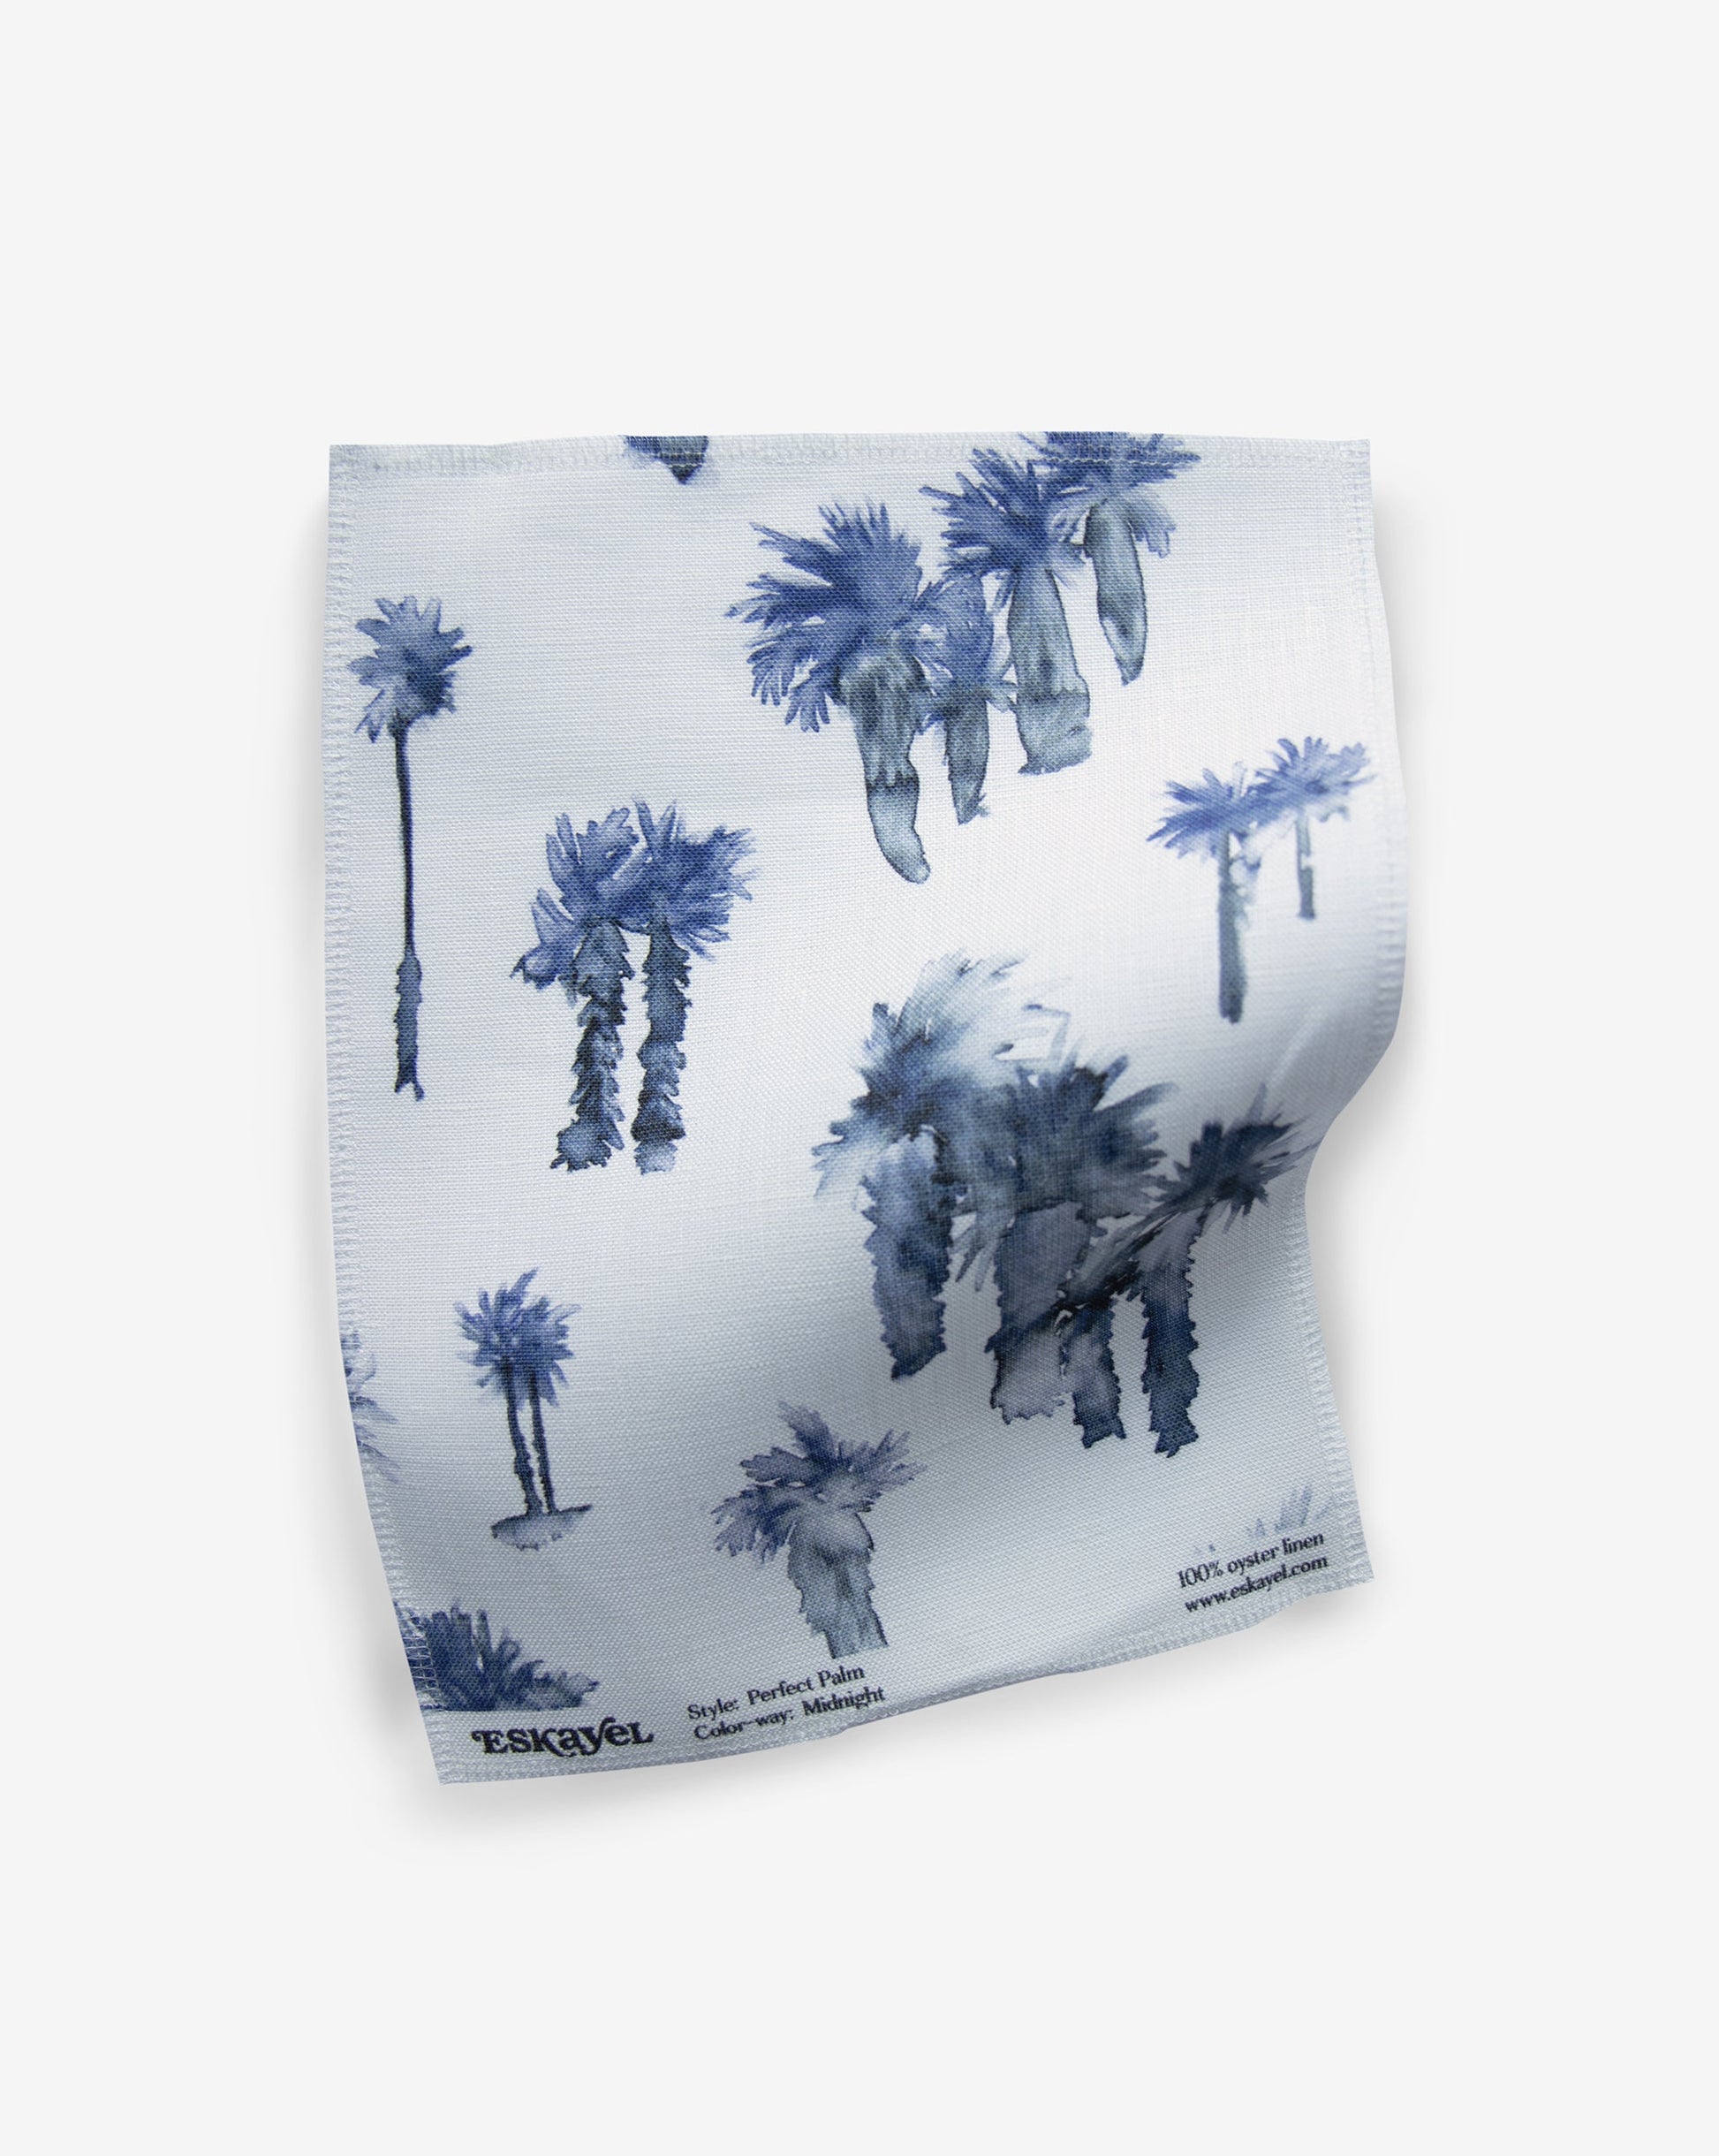 A blue and white Perfect Palm Fabric Midnight fabric with palm trees in a watercolor style